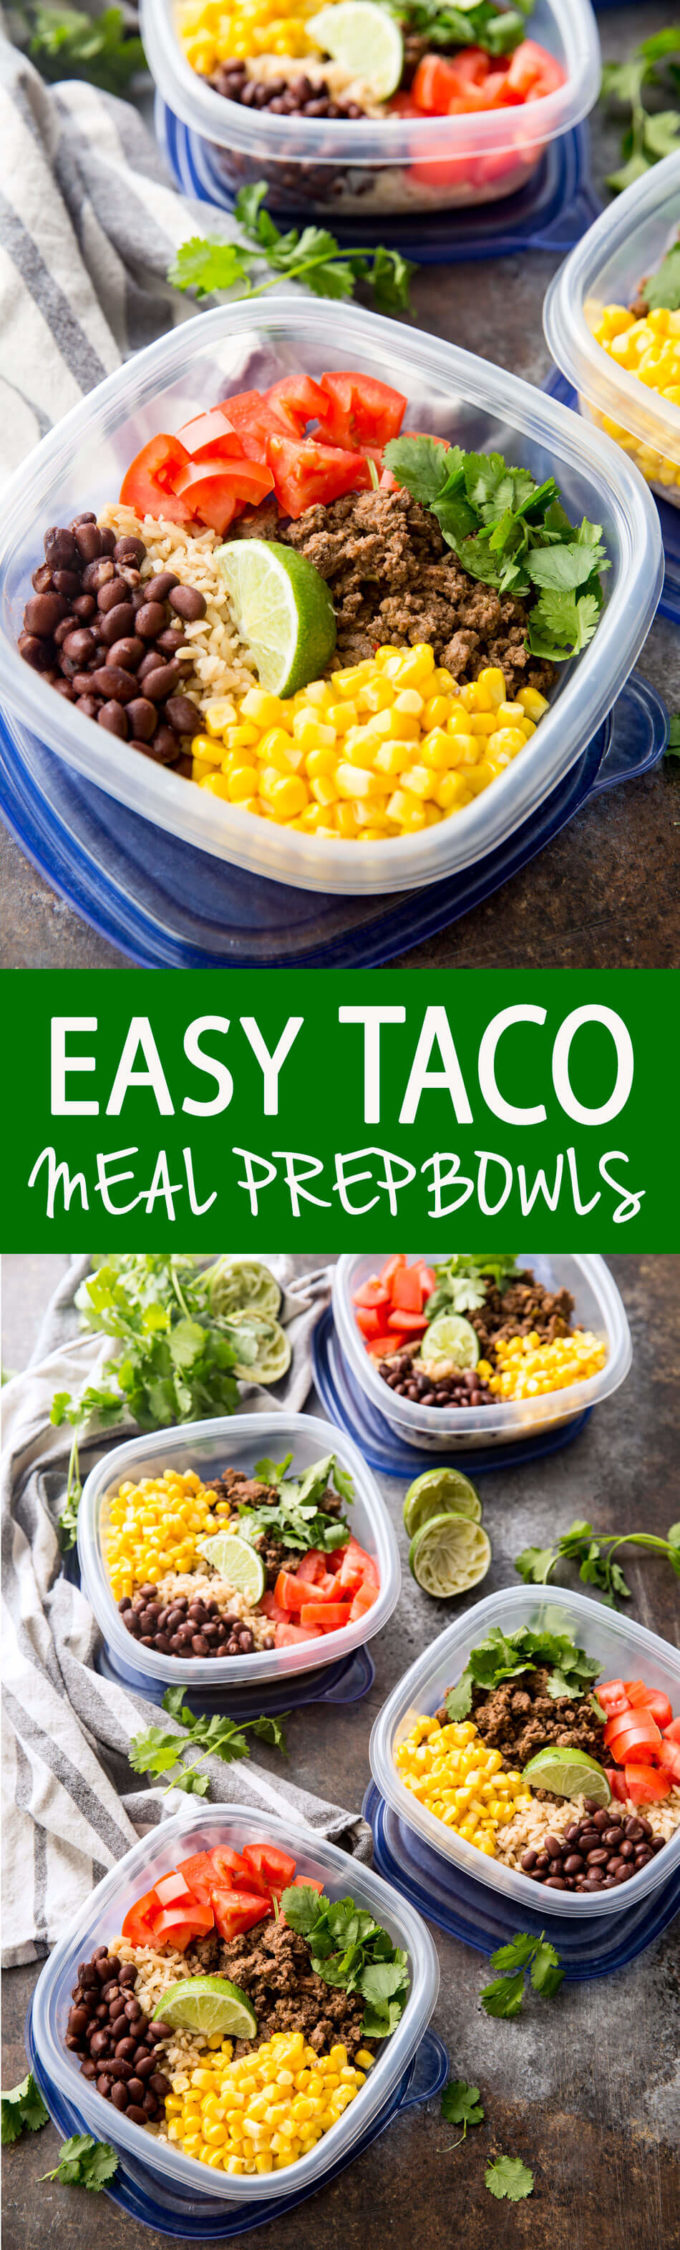 Easy Taco Meal Prep Bowls with Salsa Verde Beef and extras like corn, tomatoes, cilantro, and black beans. I swear these are better on the second day!